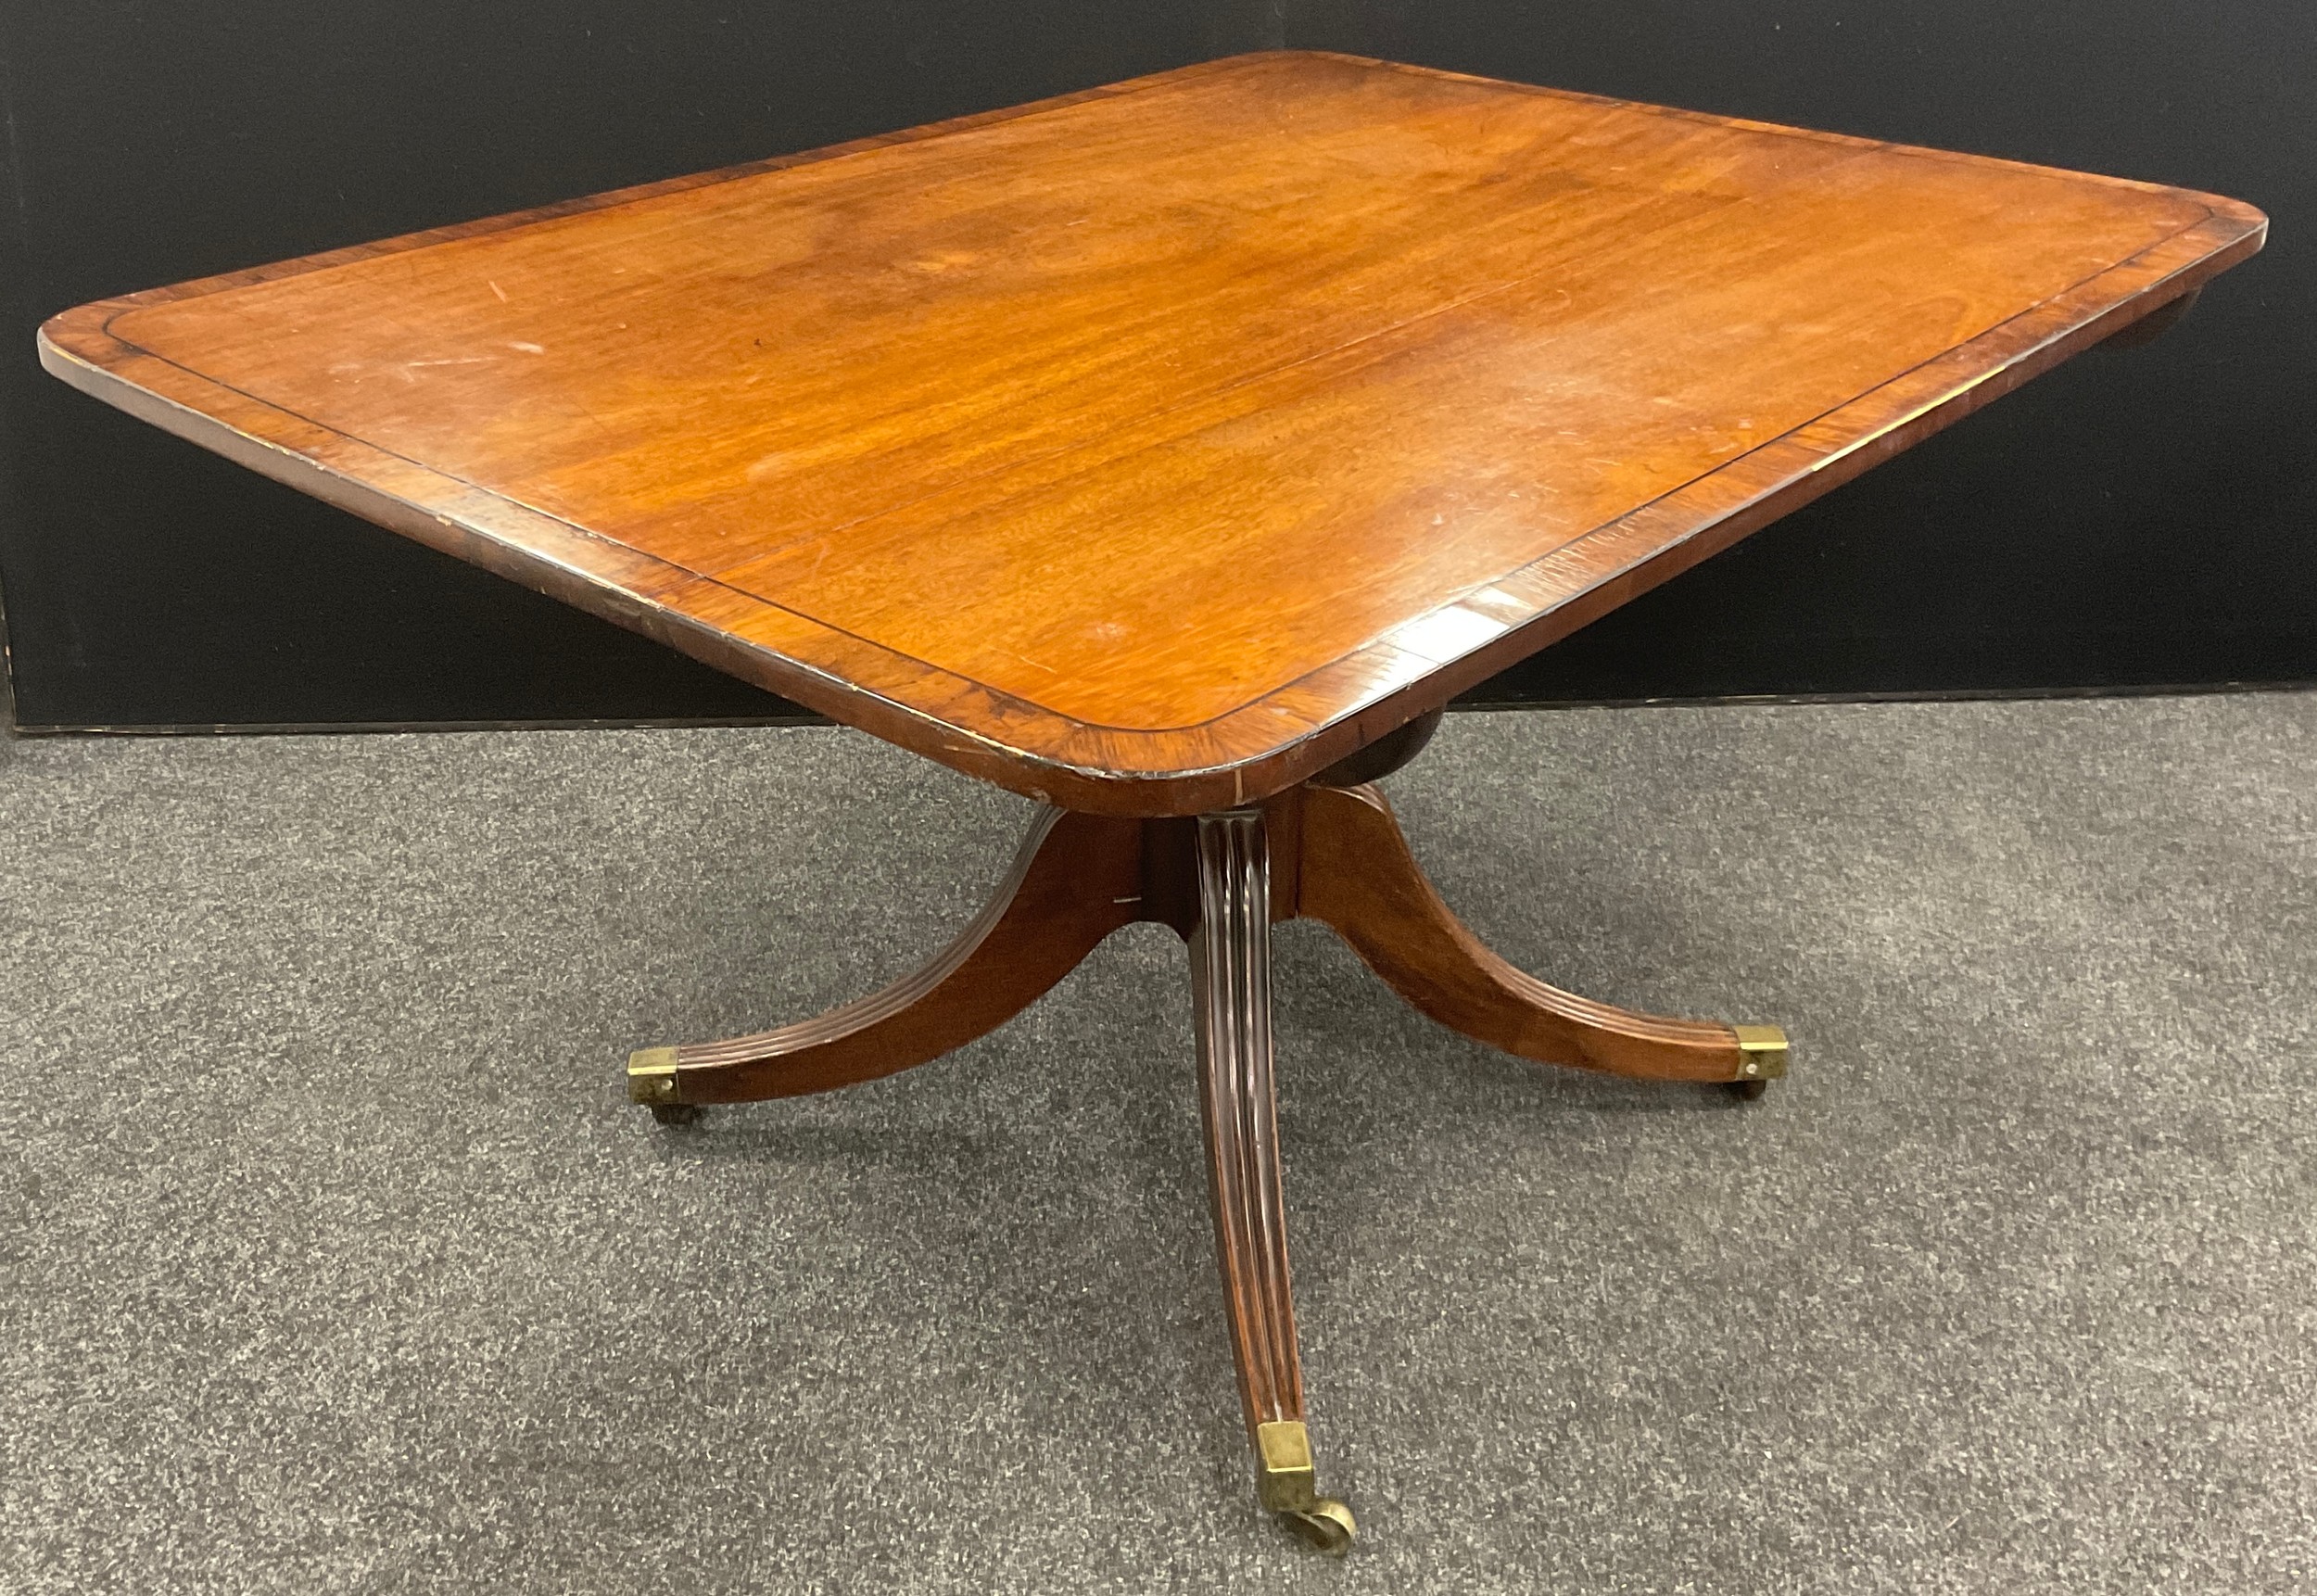 A 19th century mahogany rounded rectangular breakfast table, 71cm high x 133.5cm x 97.5cm. - Image 3 of 3